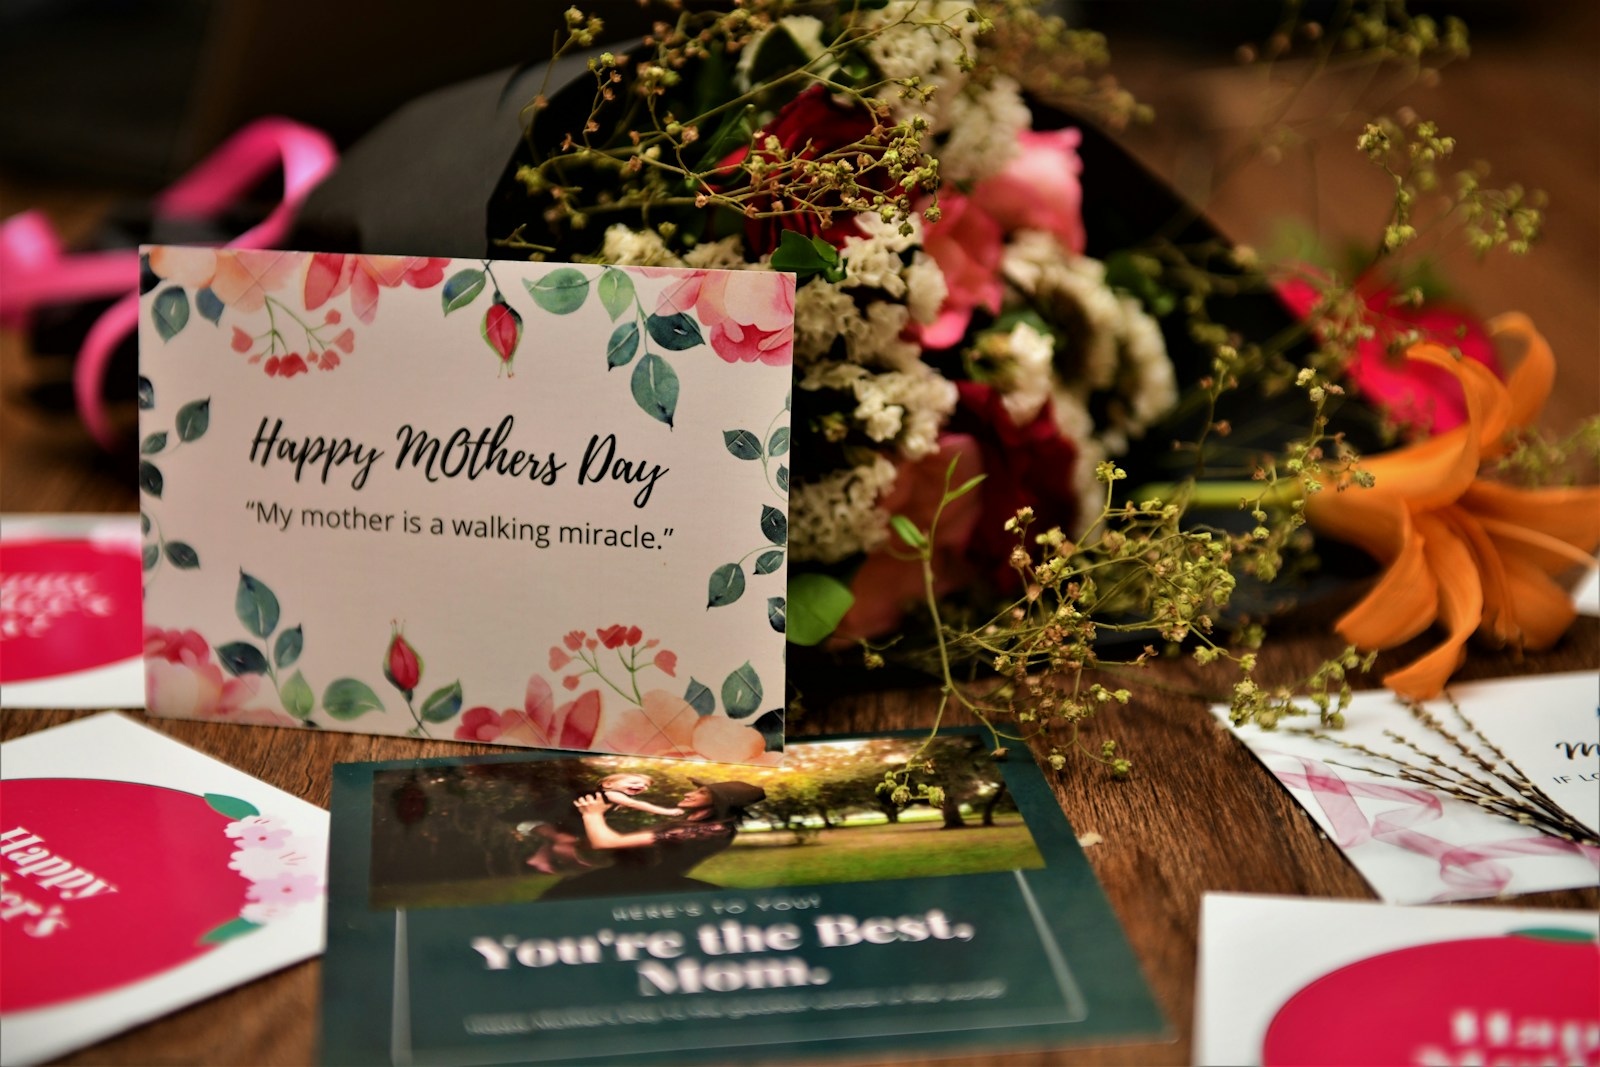 Happy Mother's Day from all of us at Balance Real Estate Group